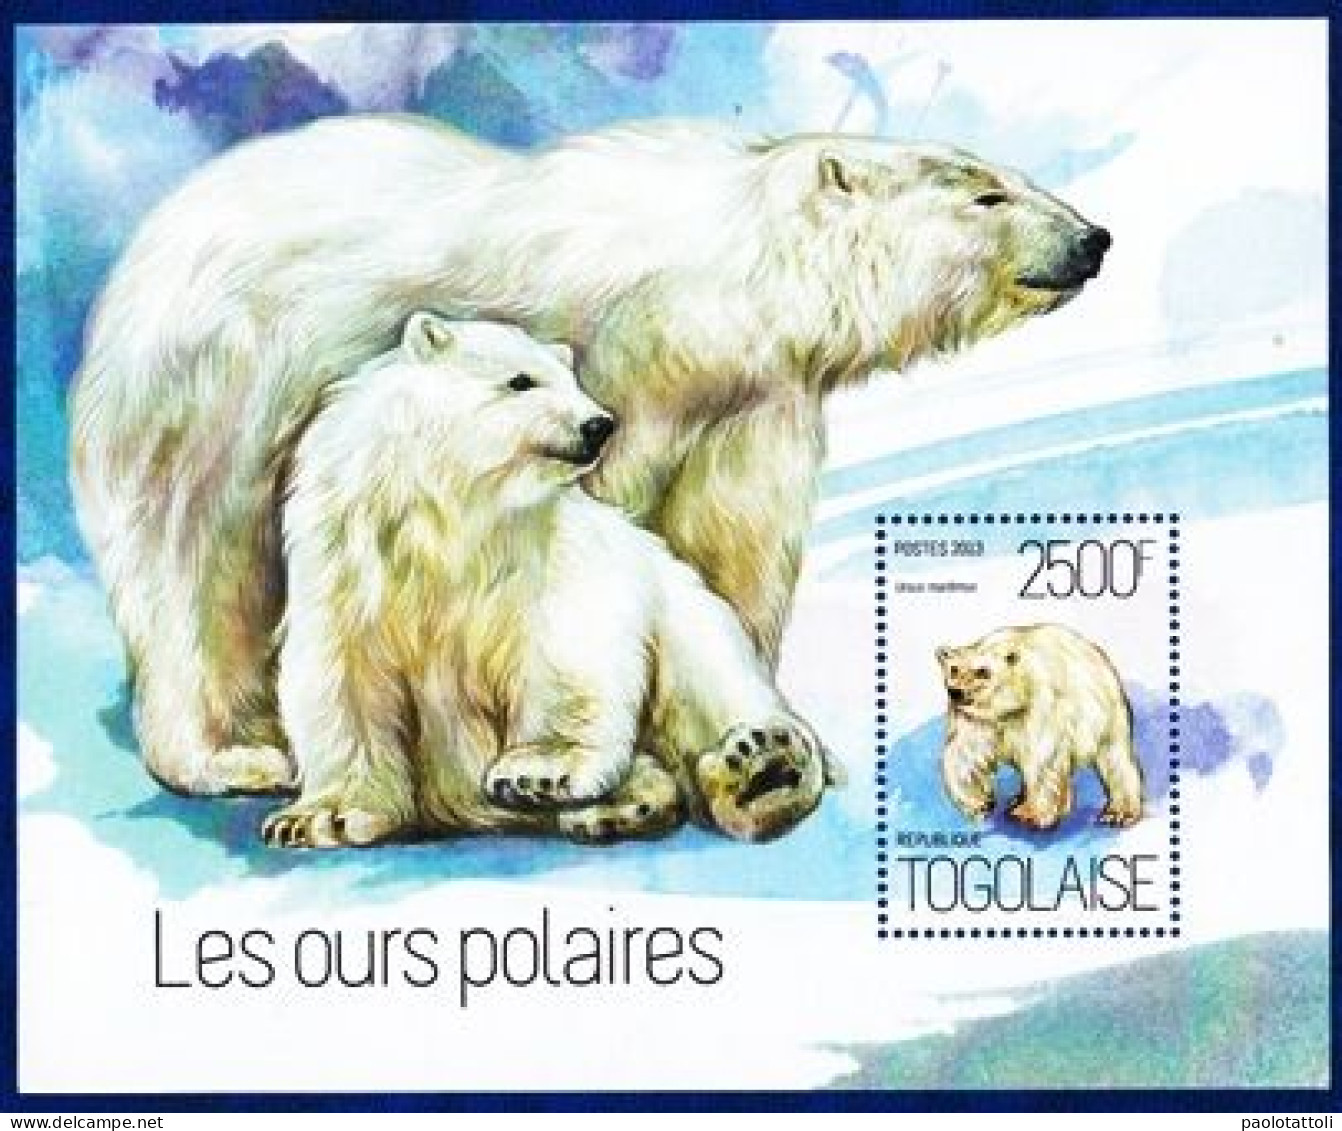 Togo, 2013- Les Ours Polaires-2500F- Block NewNH - Bears